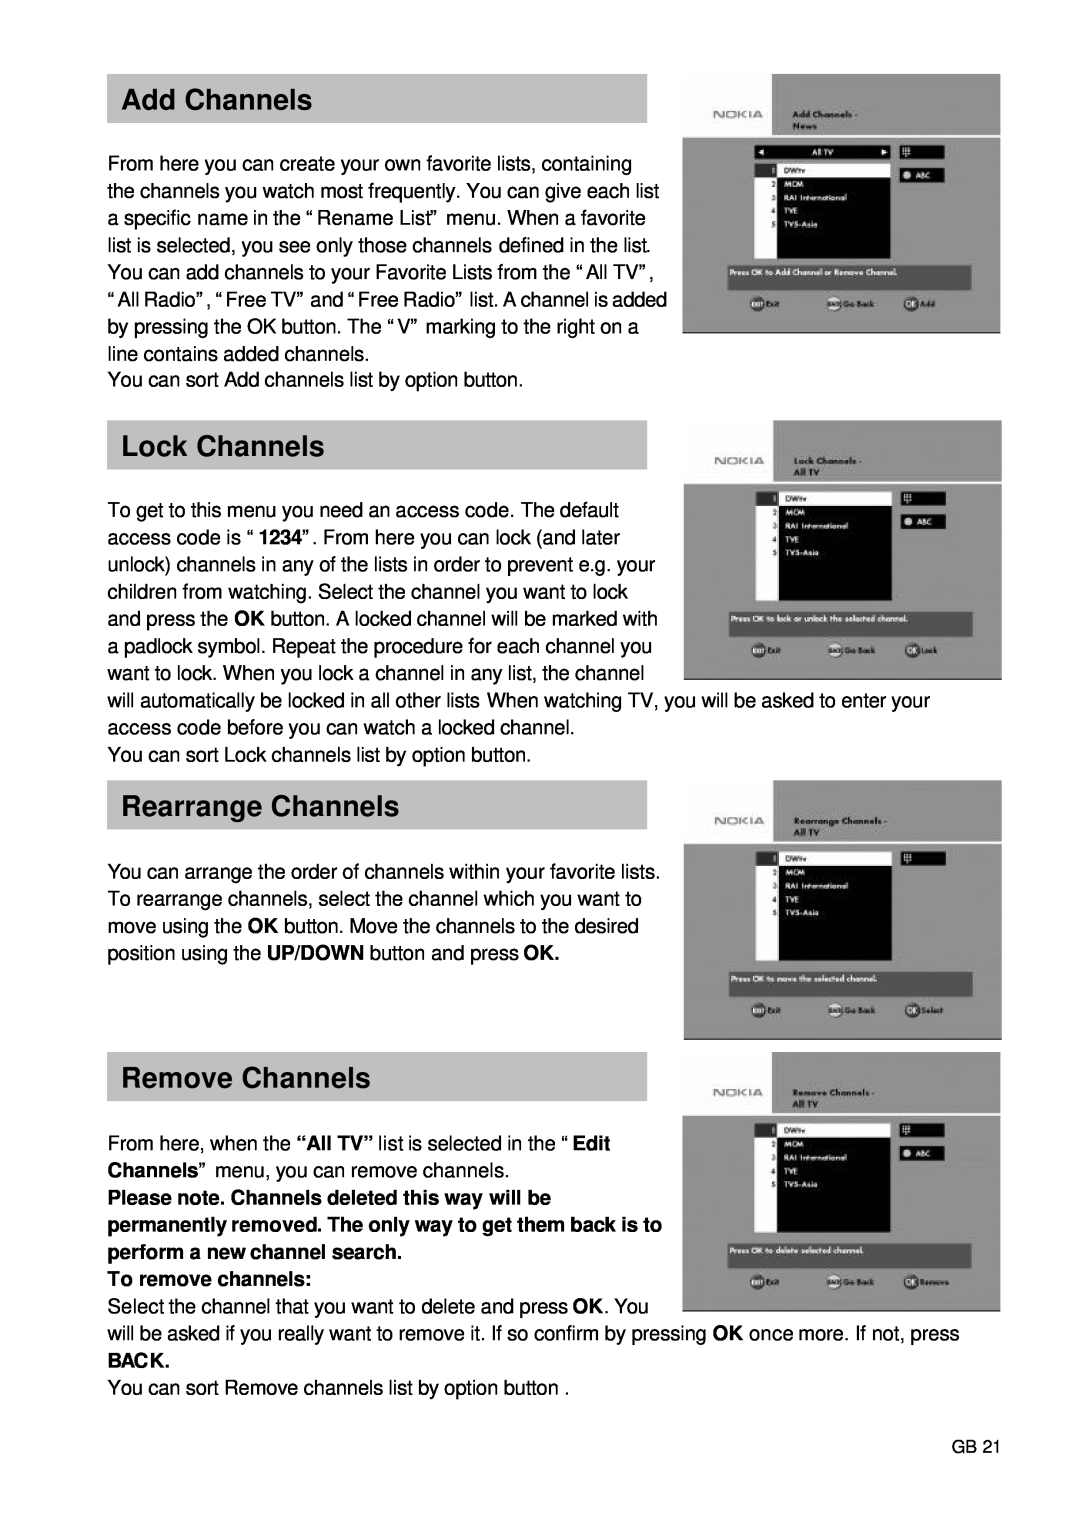 Nokia 9660S owner manual Add Channels, Lock Channels, Rearrange Channels, Remove Channels, To remove channels, Back 